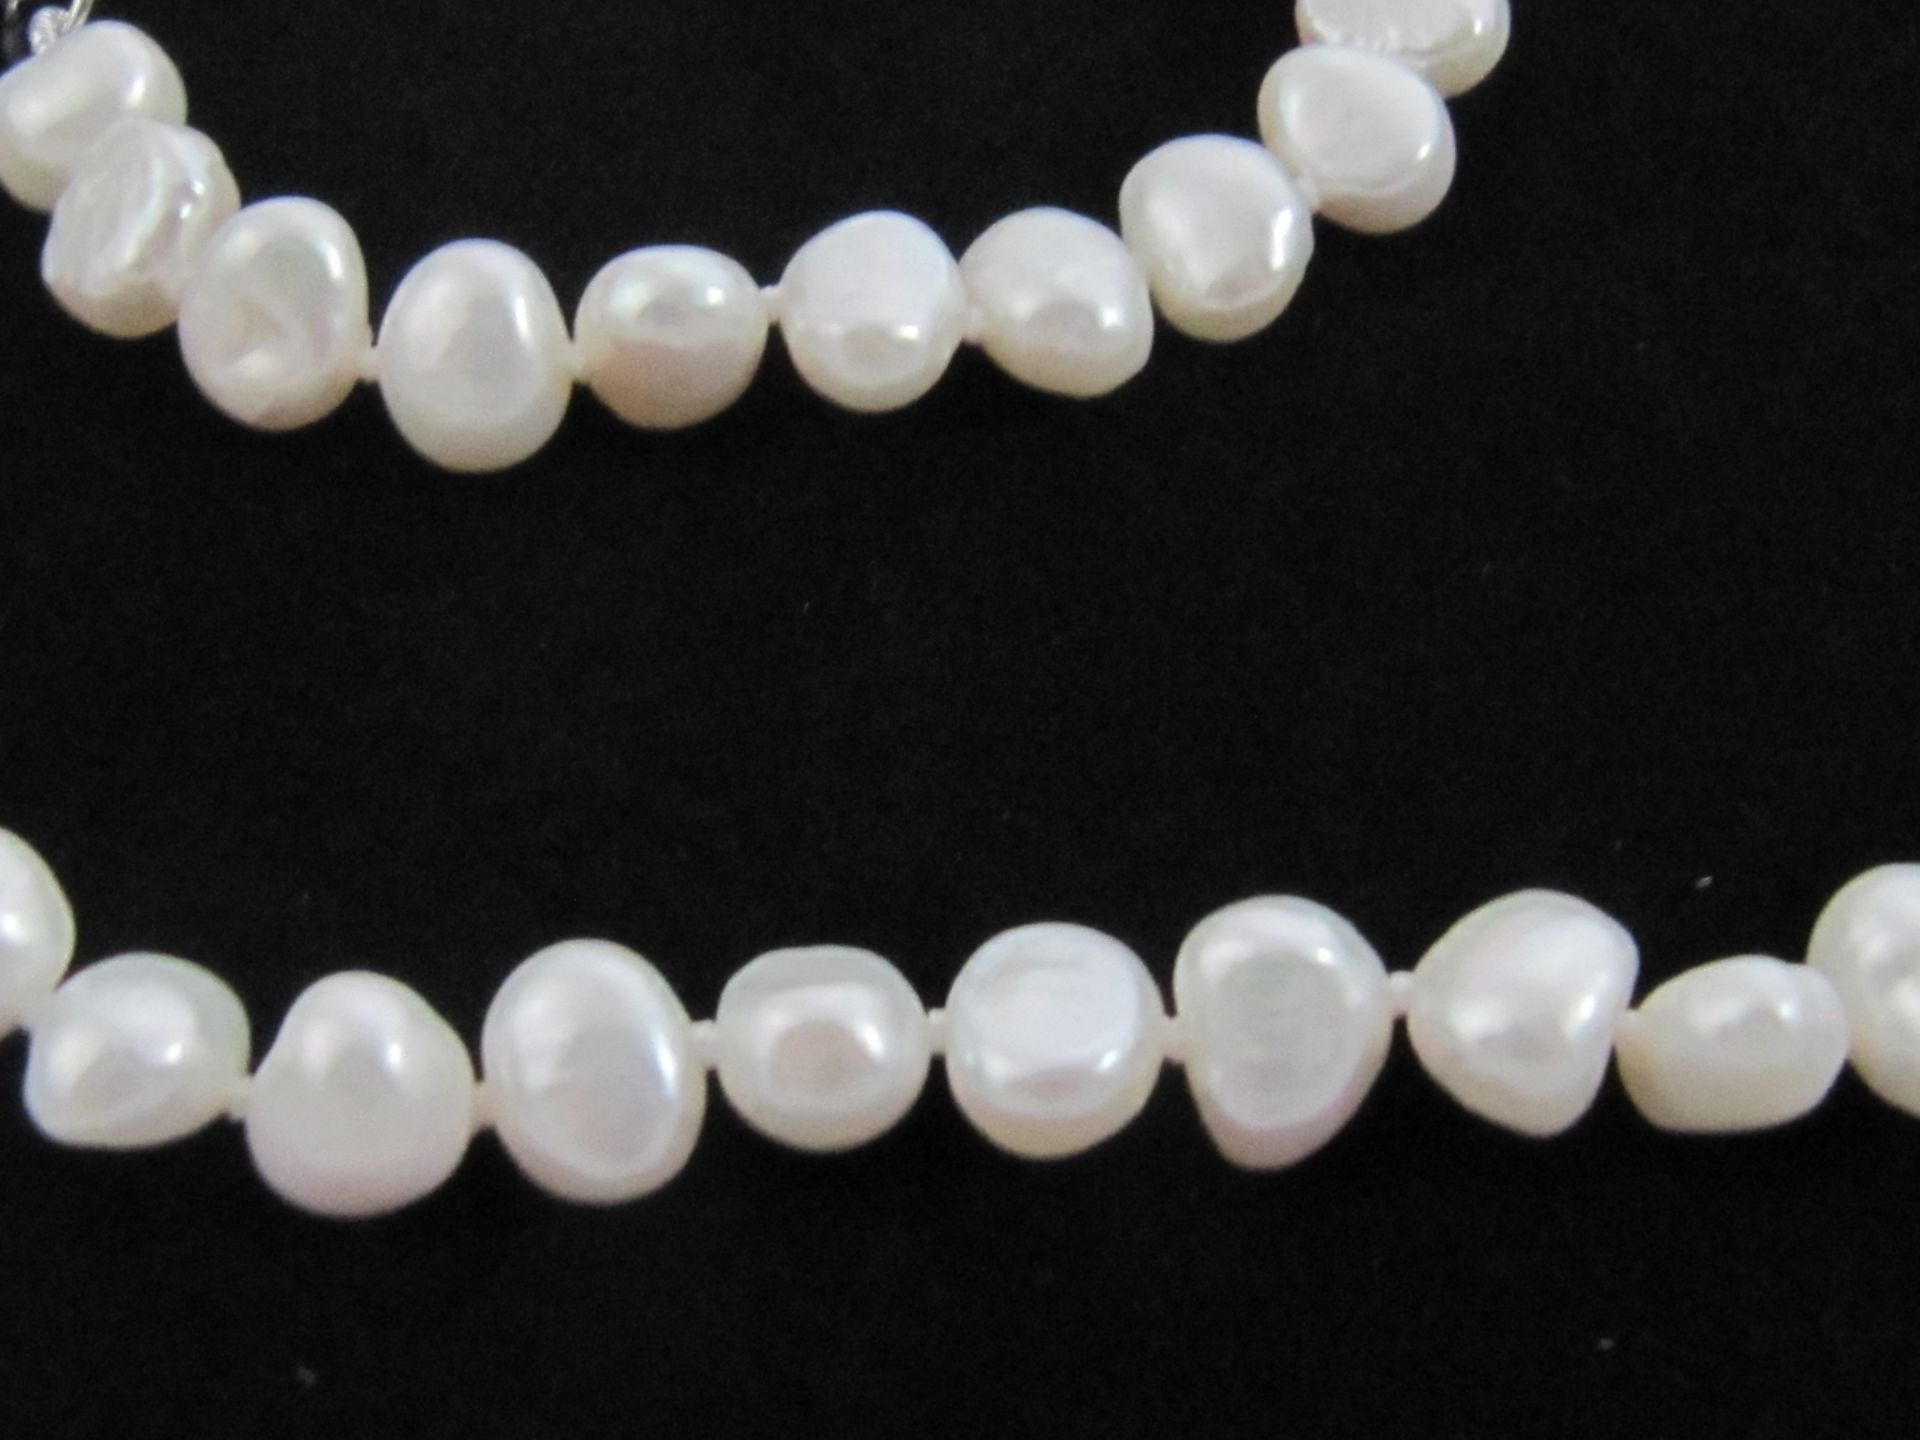 Real Pearl Necklace, Bracelet & Earring Set. - Image 2 of 5